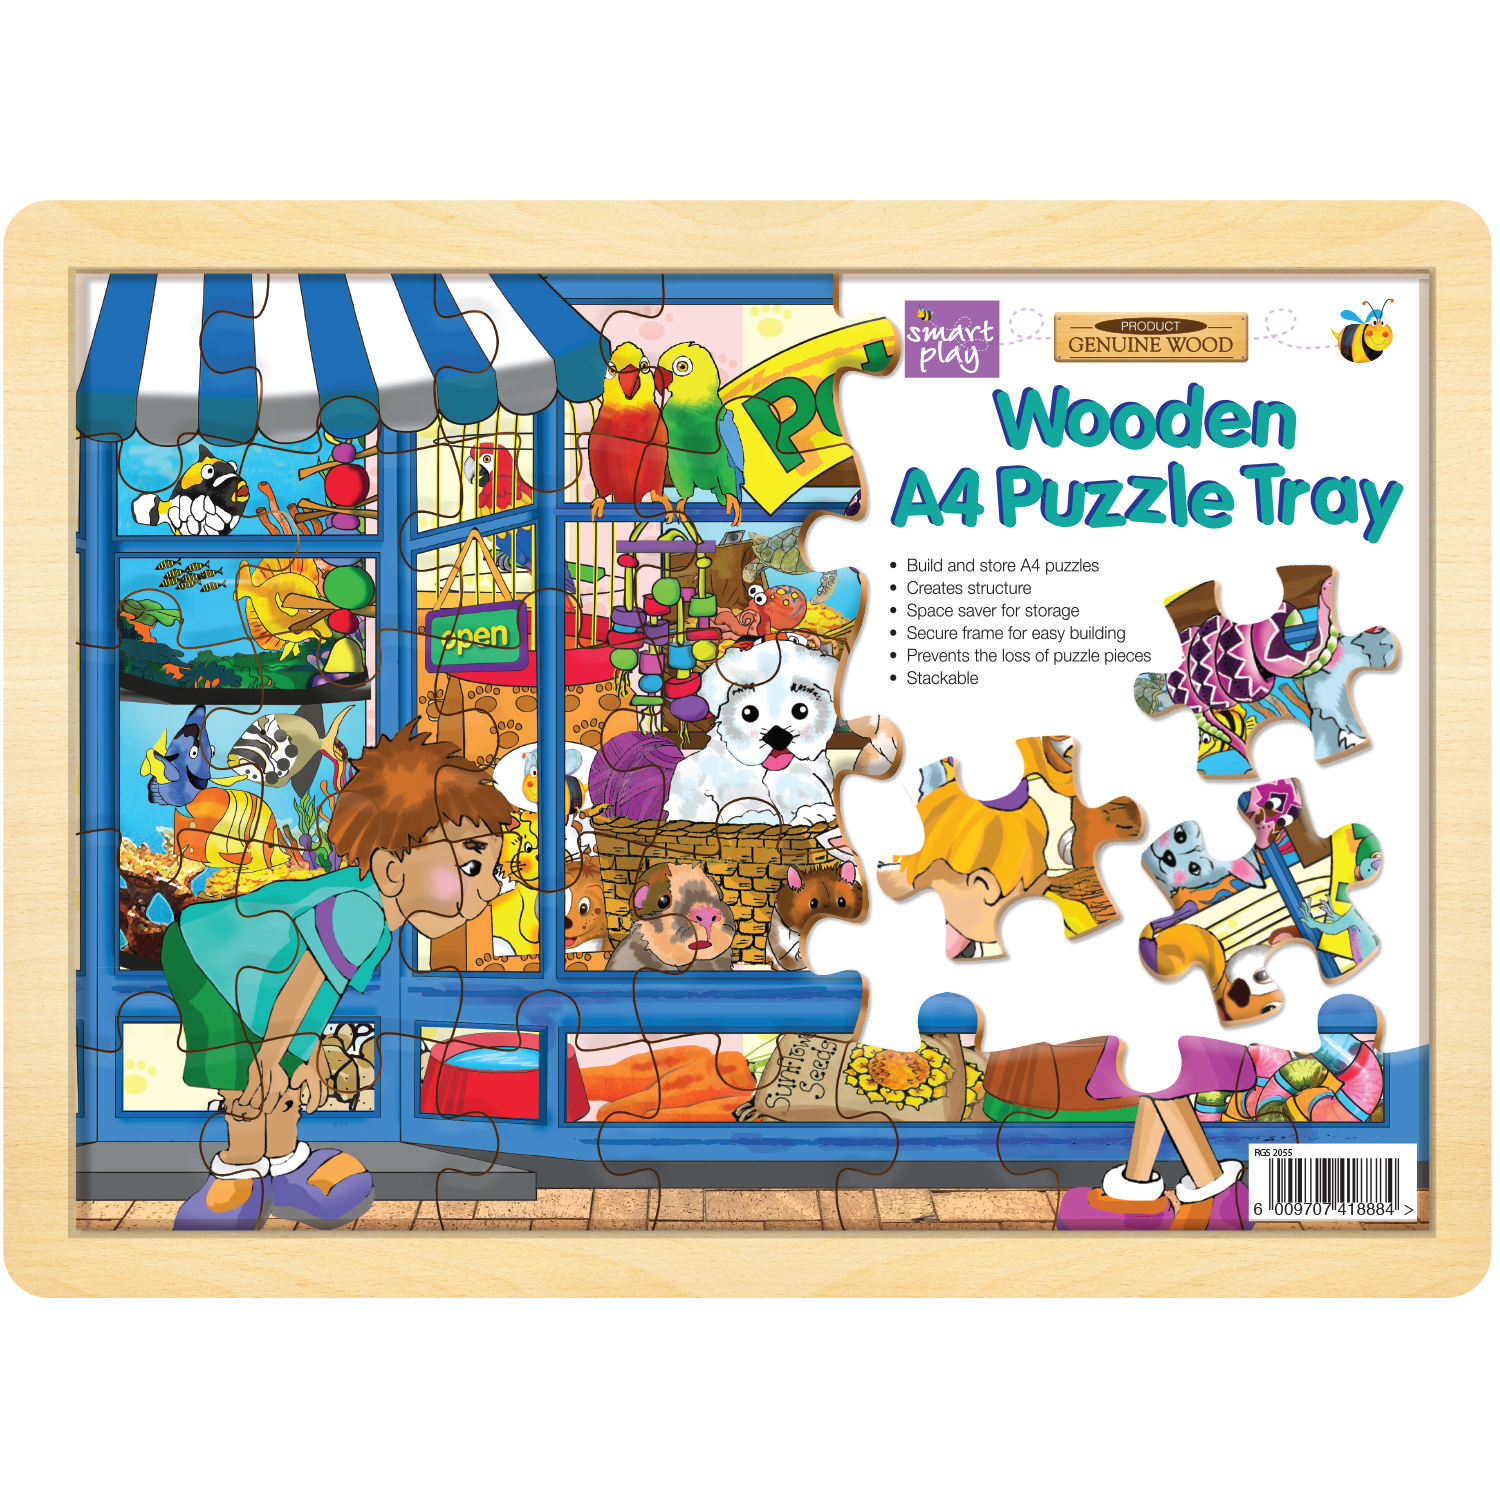 Puzzle Sorting Trays - RGS Group